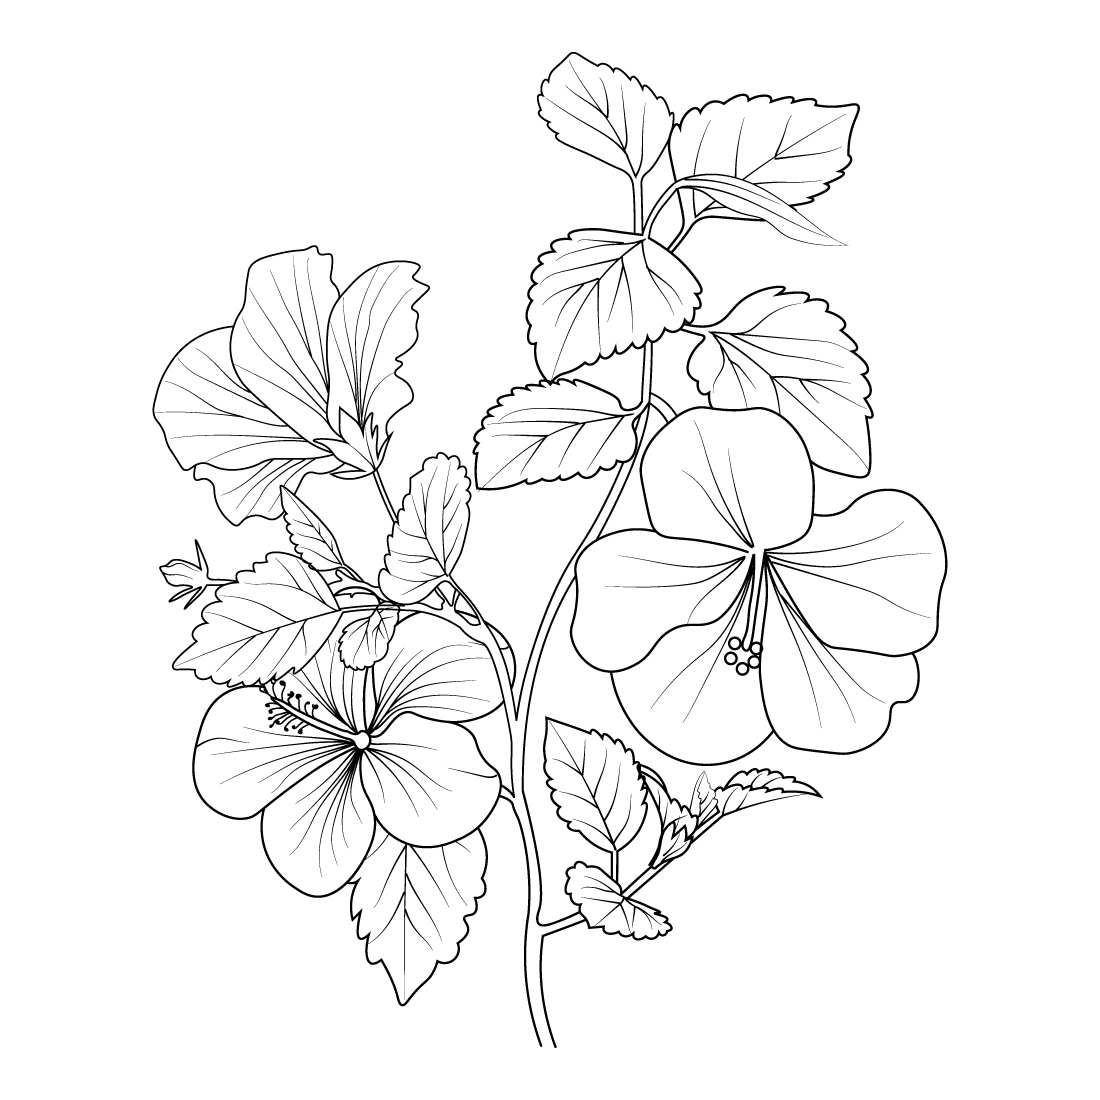 Flower coloring page and books, hand-drawn monochrome vector sketch hibiscus flower, cover image.